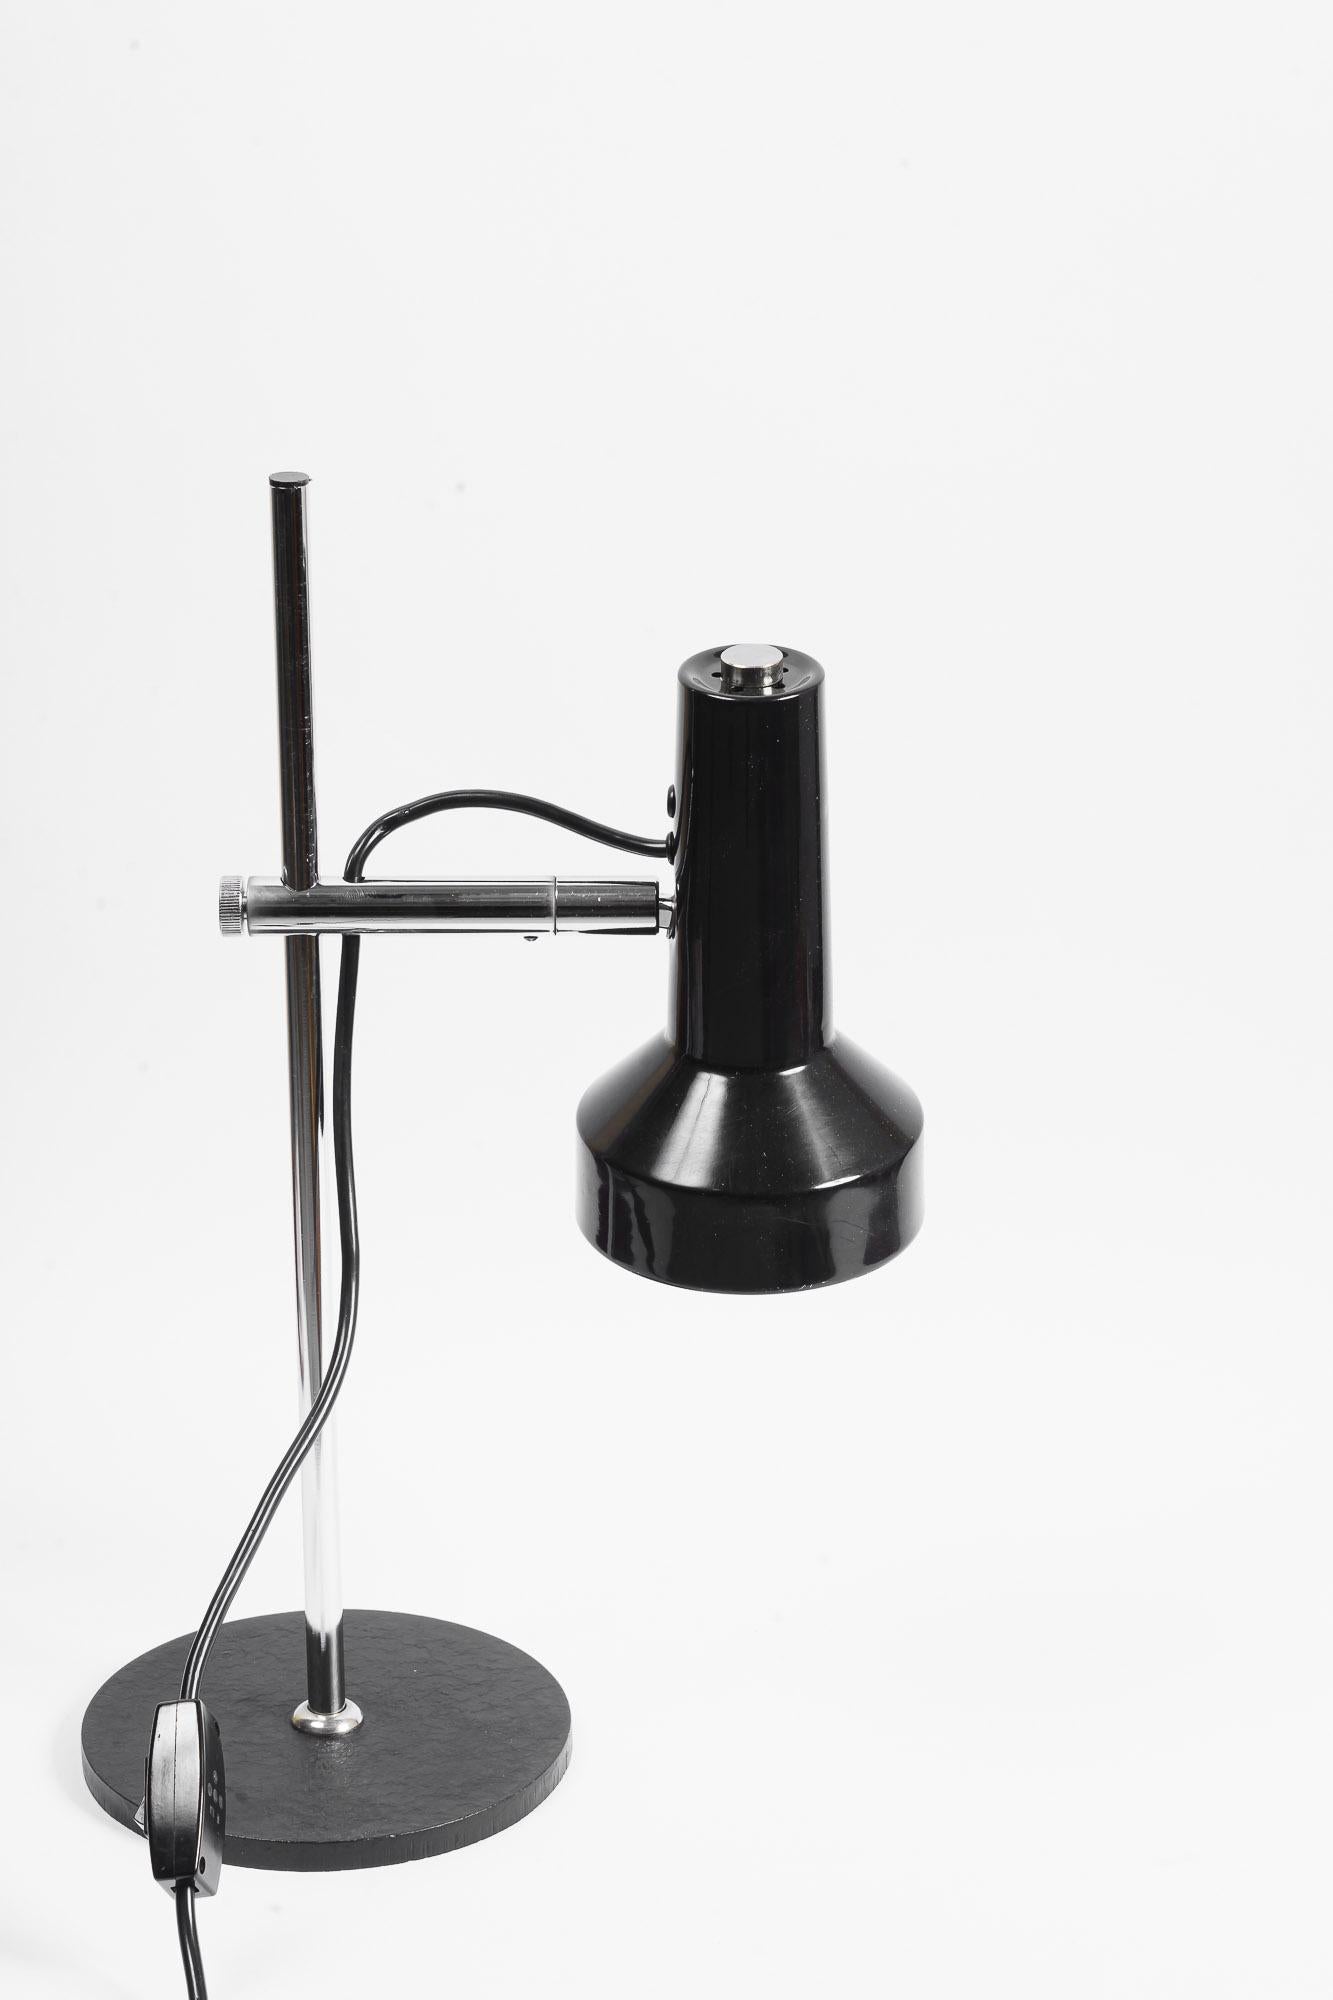 Adjustable Table lamp italy around 1960s
The hight is adjustable from 20cm up to 50cm